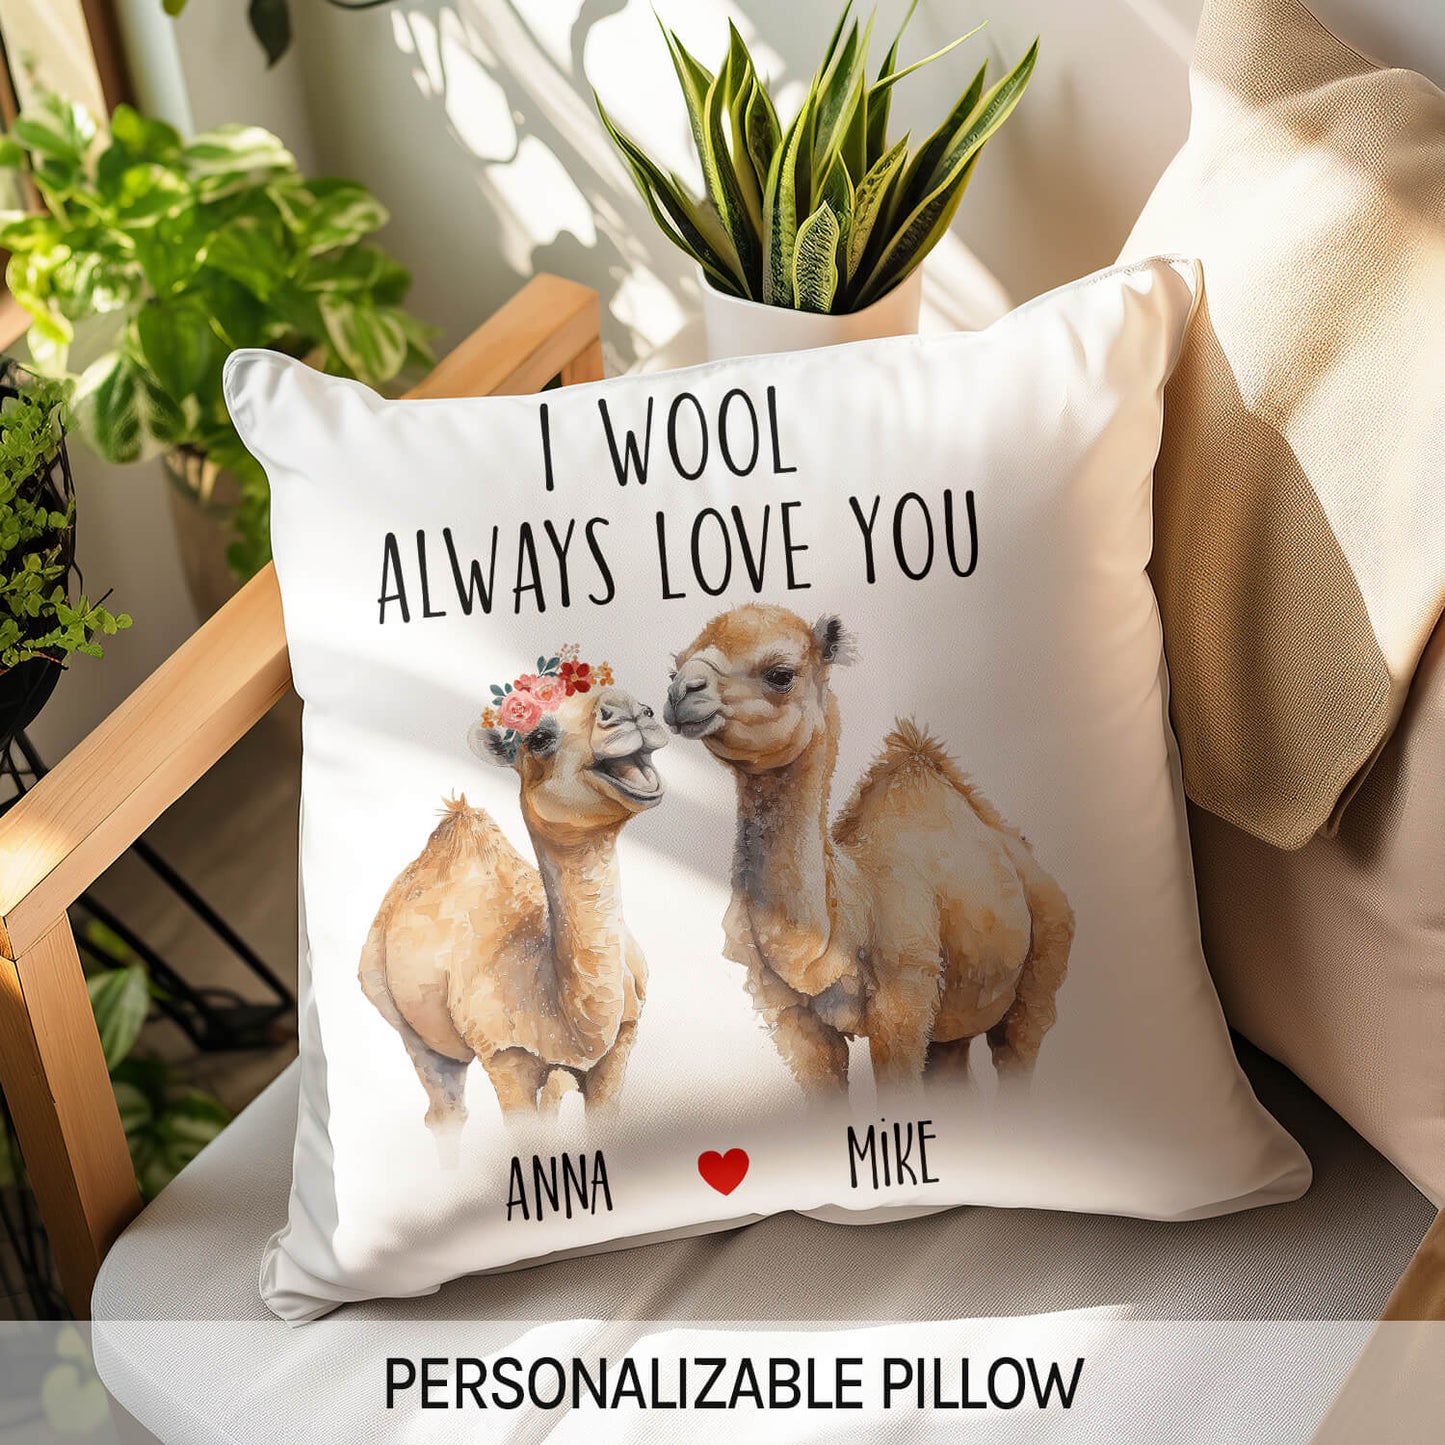 I Wool Always Love You - Personalized Anniversary or Valentine's Day gift for Boyfriend or Girlfriend - Custom Pillow - MyMindfulGifts